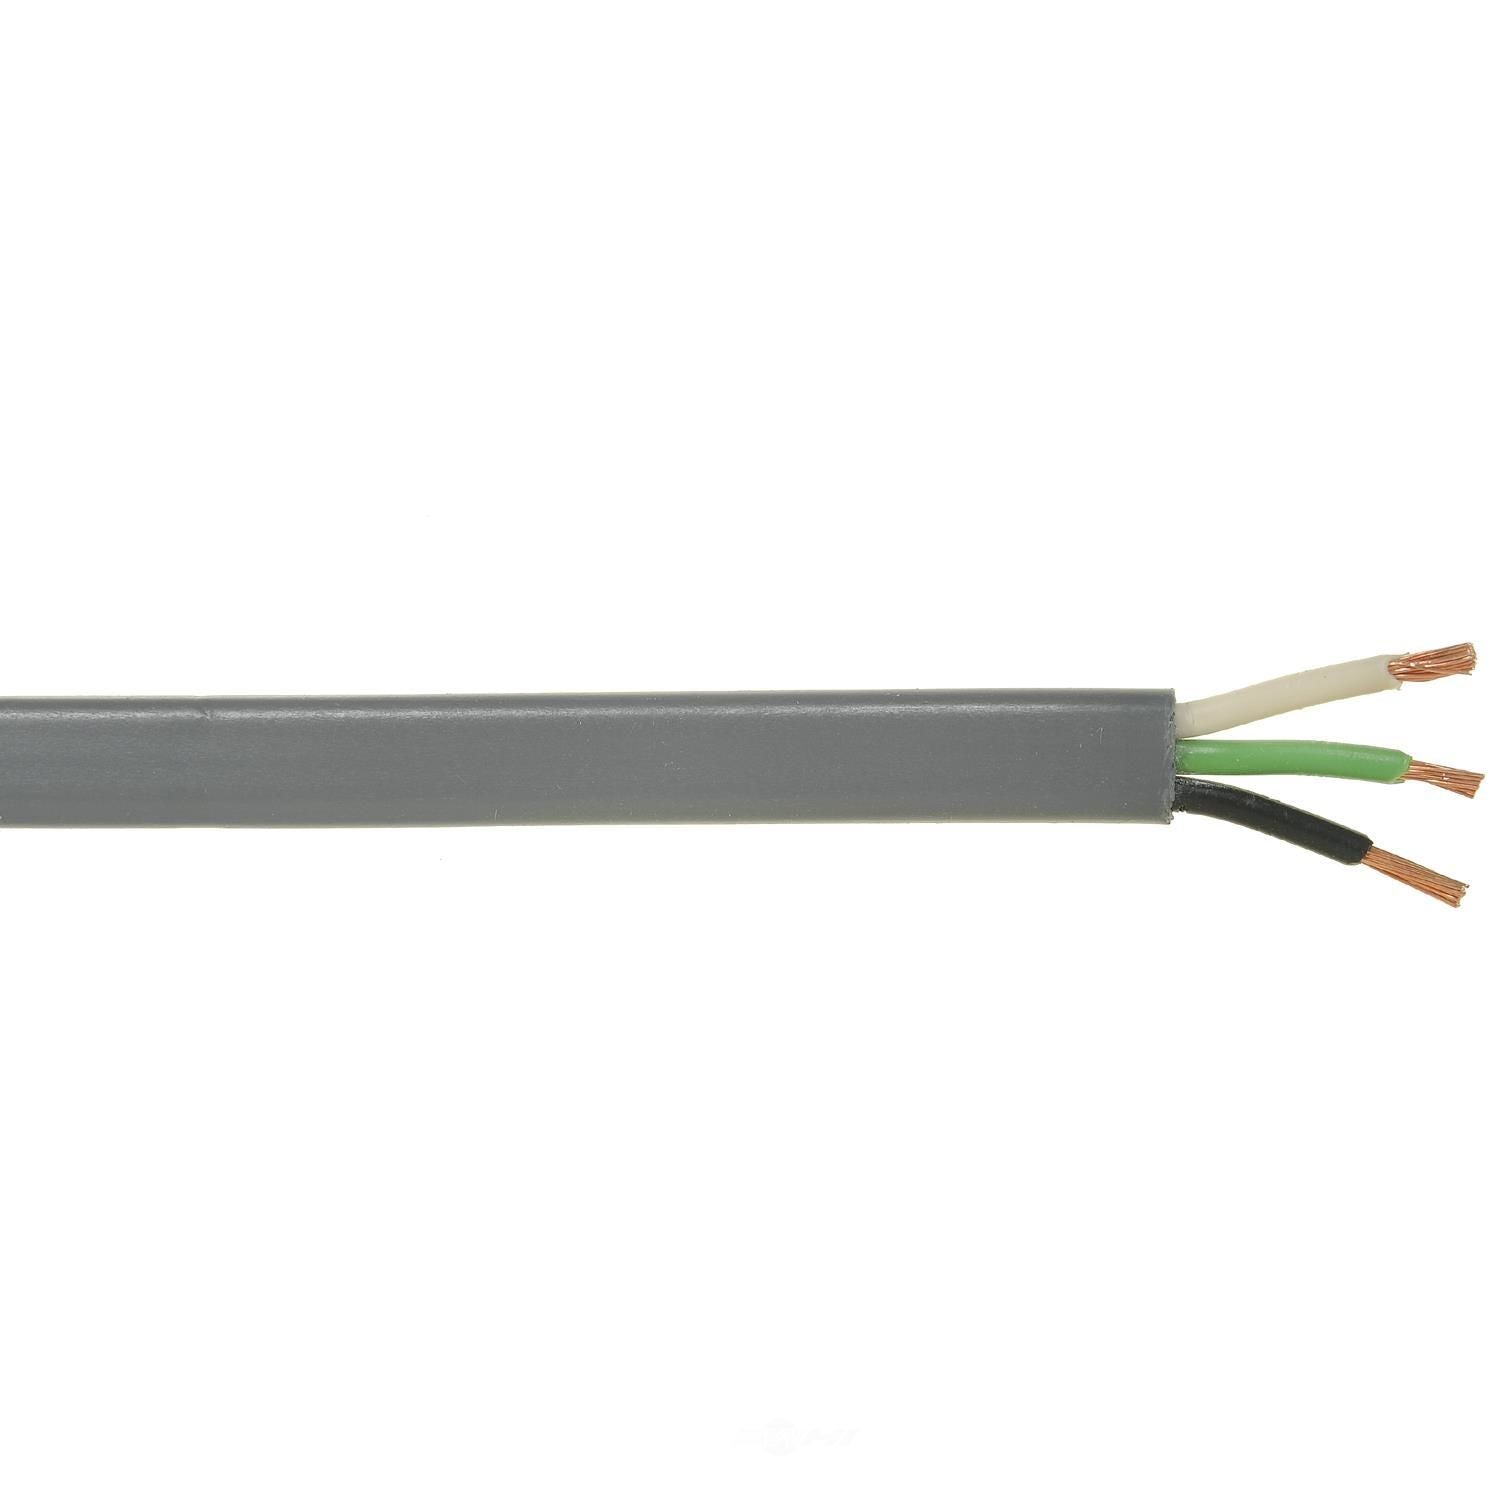 YSP WR127-100 Wells Flat Multi-Conductor Primary Wire (12G, 3 Wire)